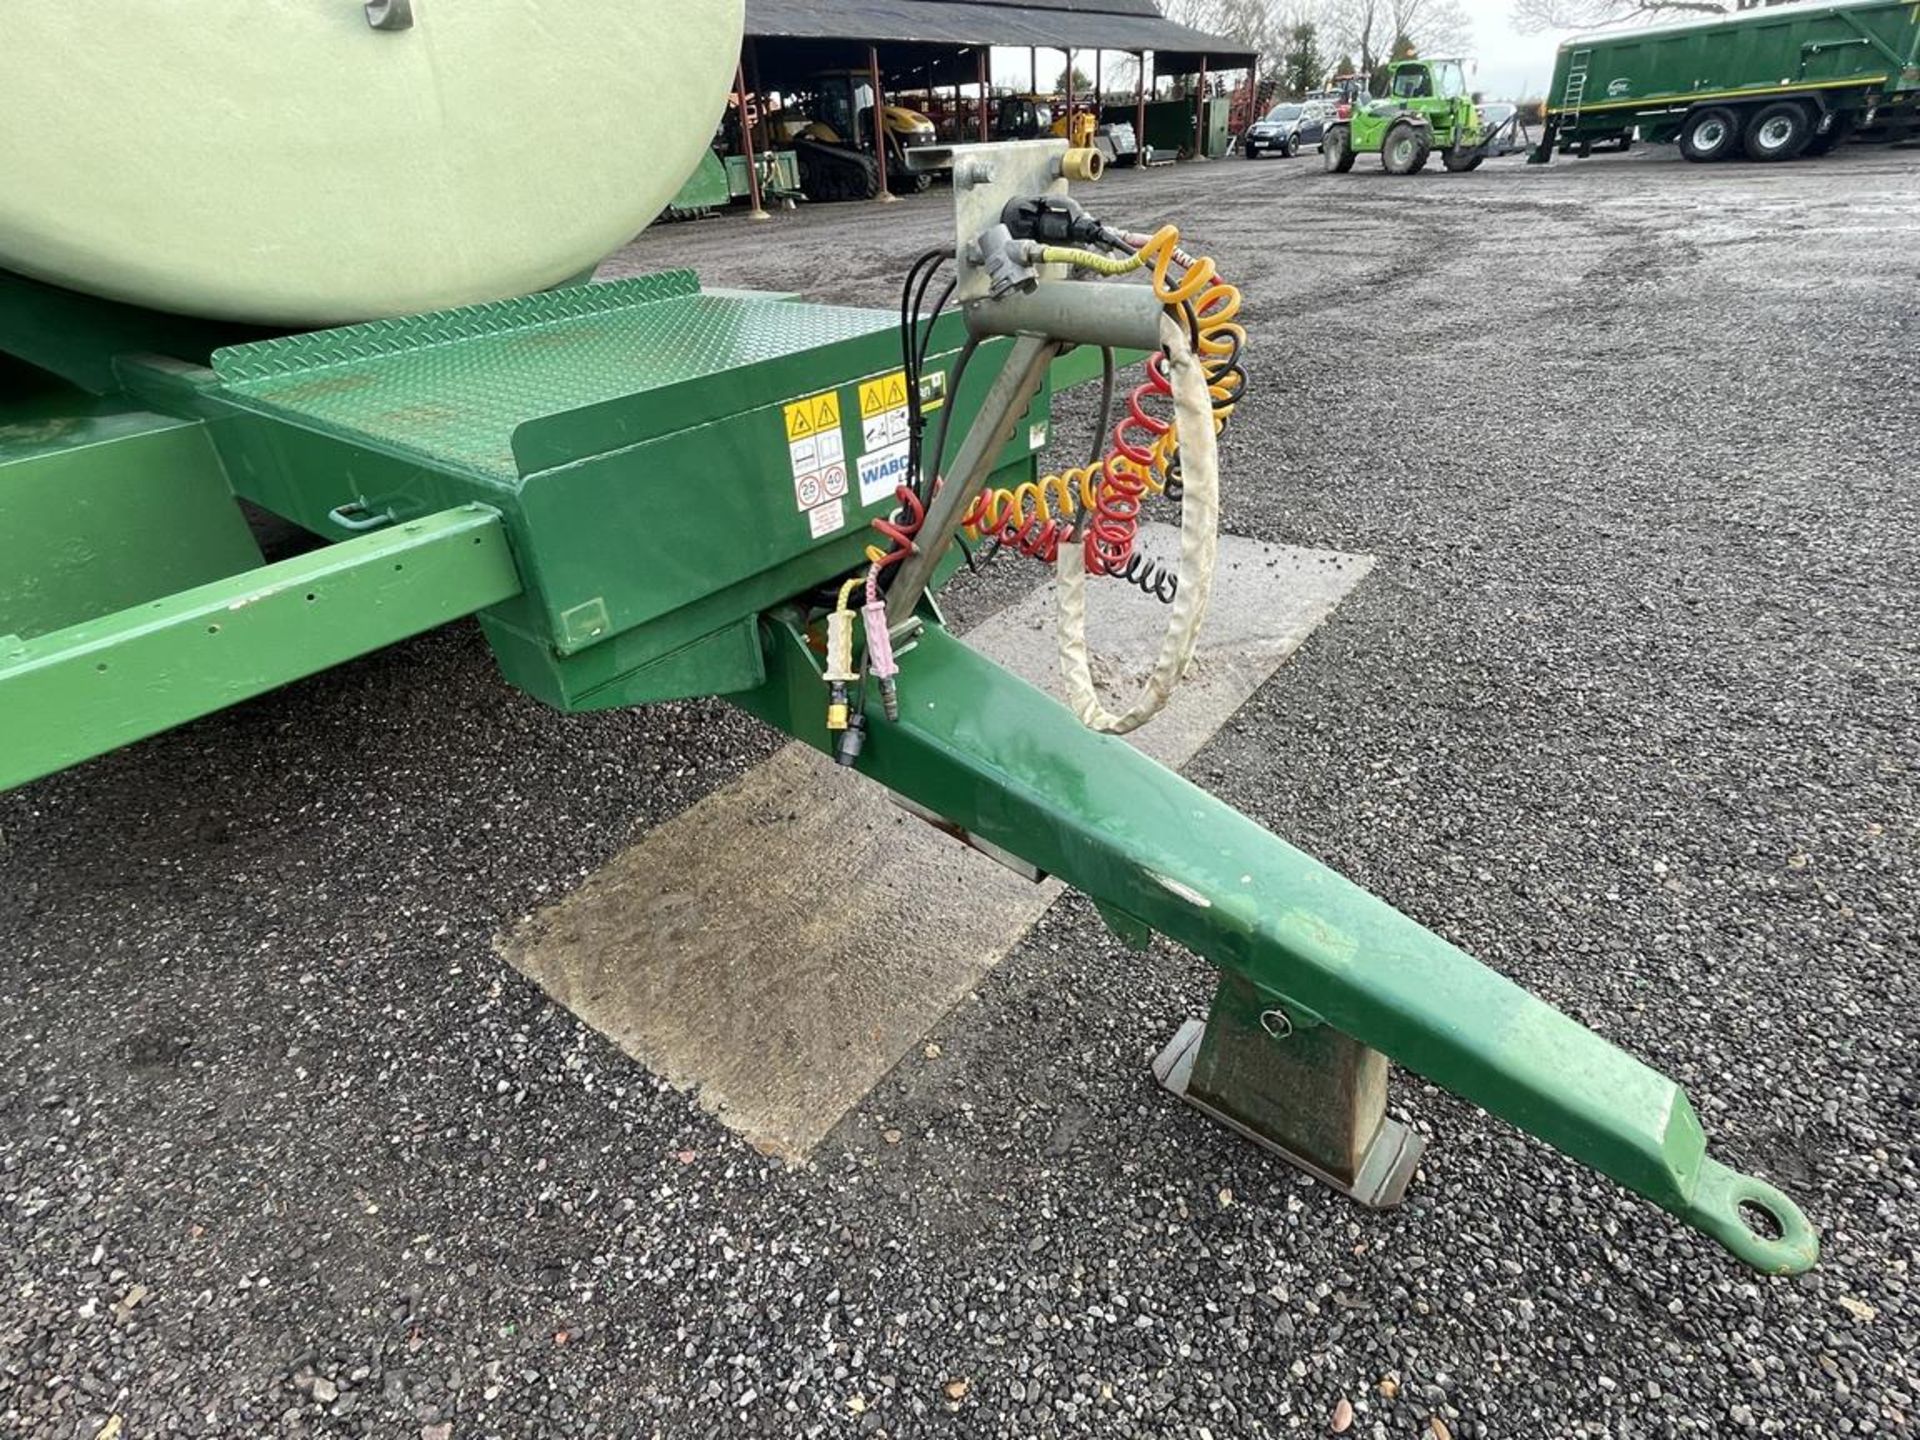 2018 Bailey 15,000 Litre Water Bowser Double Axle Fibreglass Trailer S/No. 1702316, Commercial - Image 7 of 10